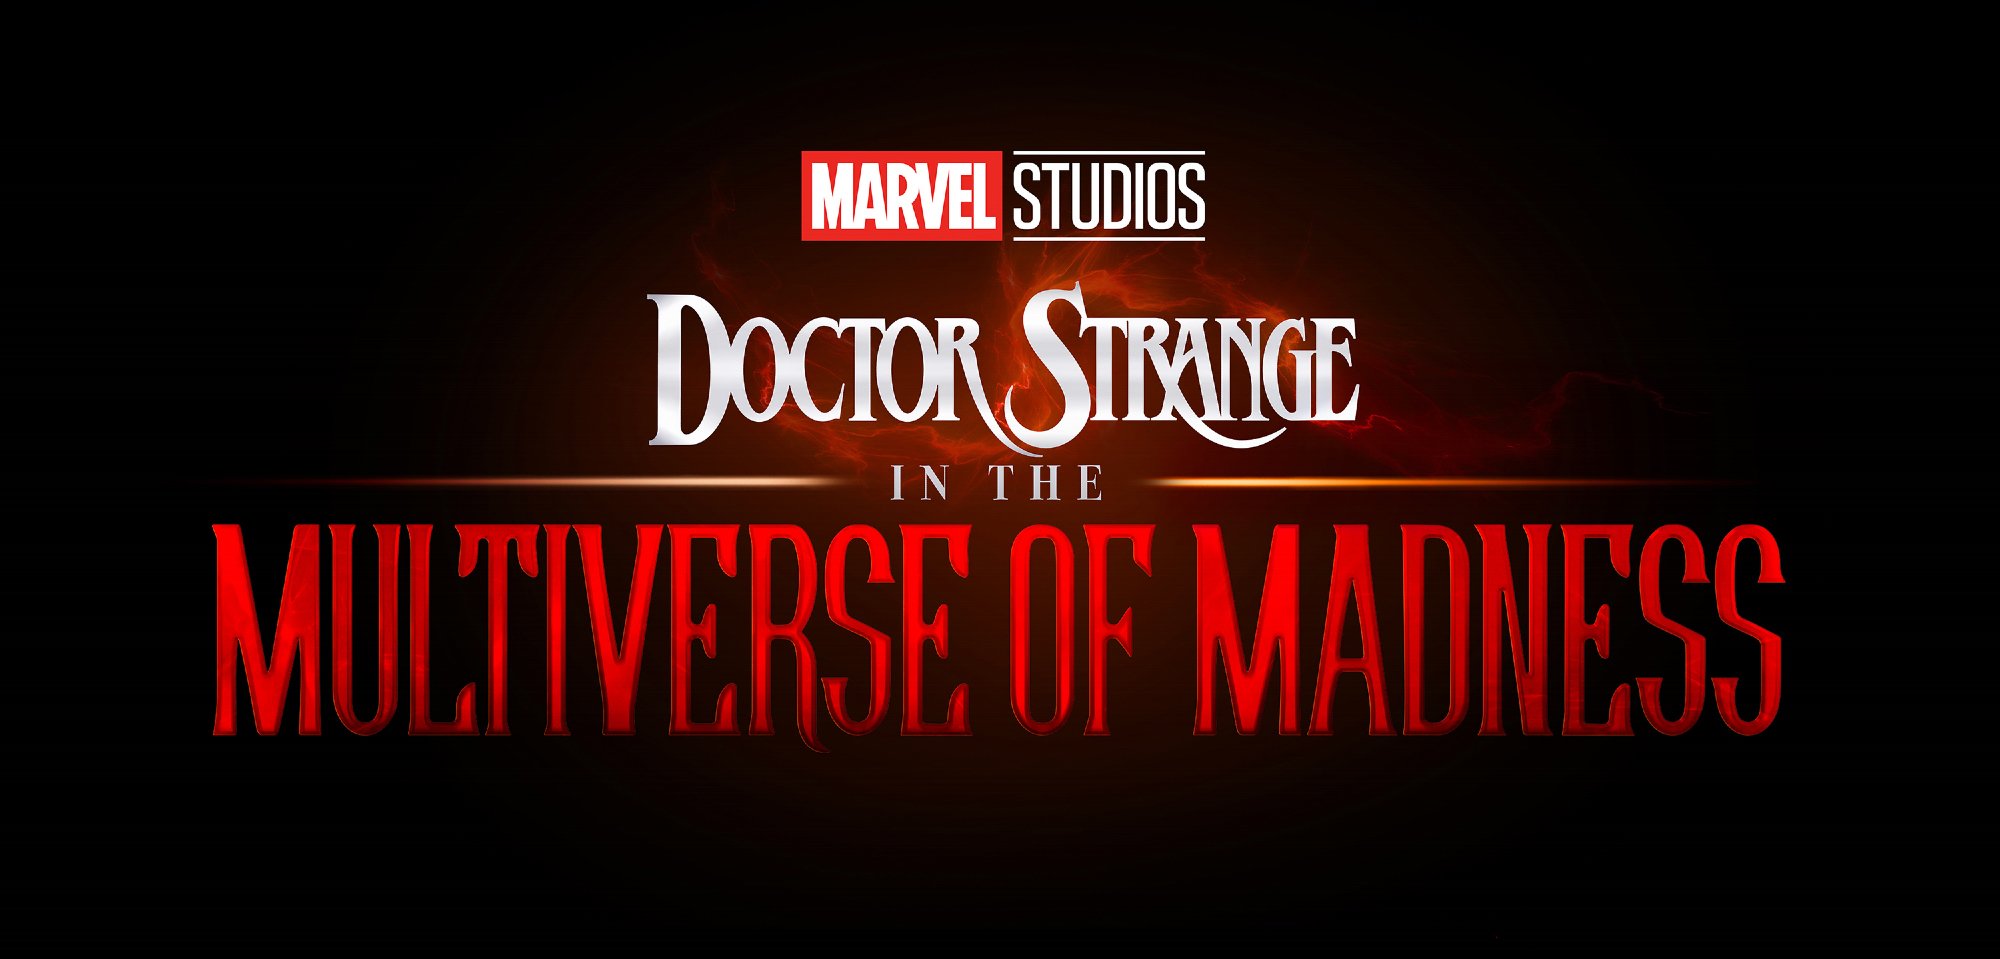 MCU's 'Doctor Strange in the Multiverse of Madness' logo